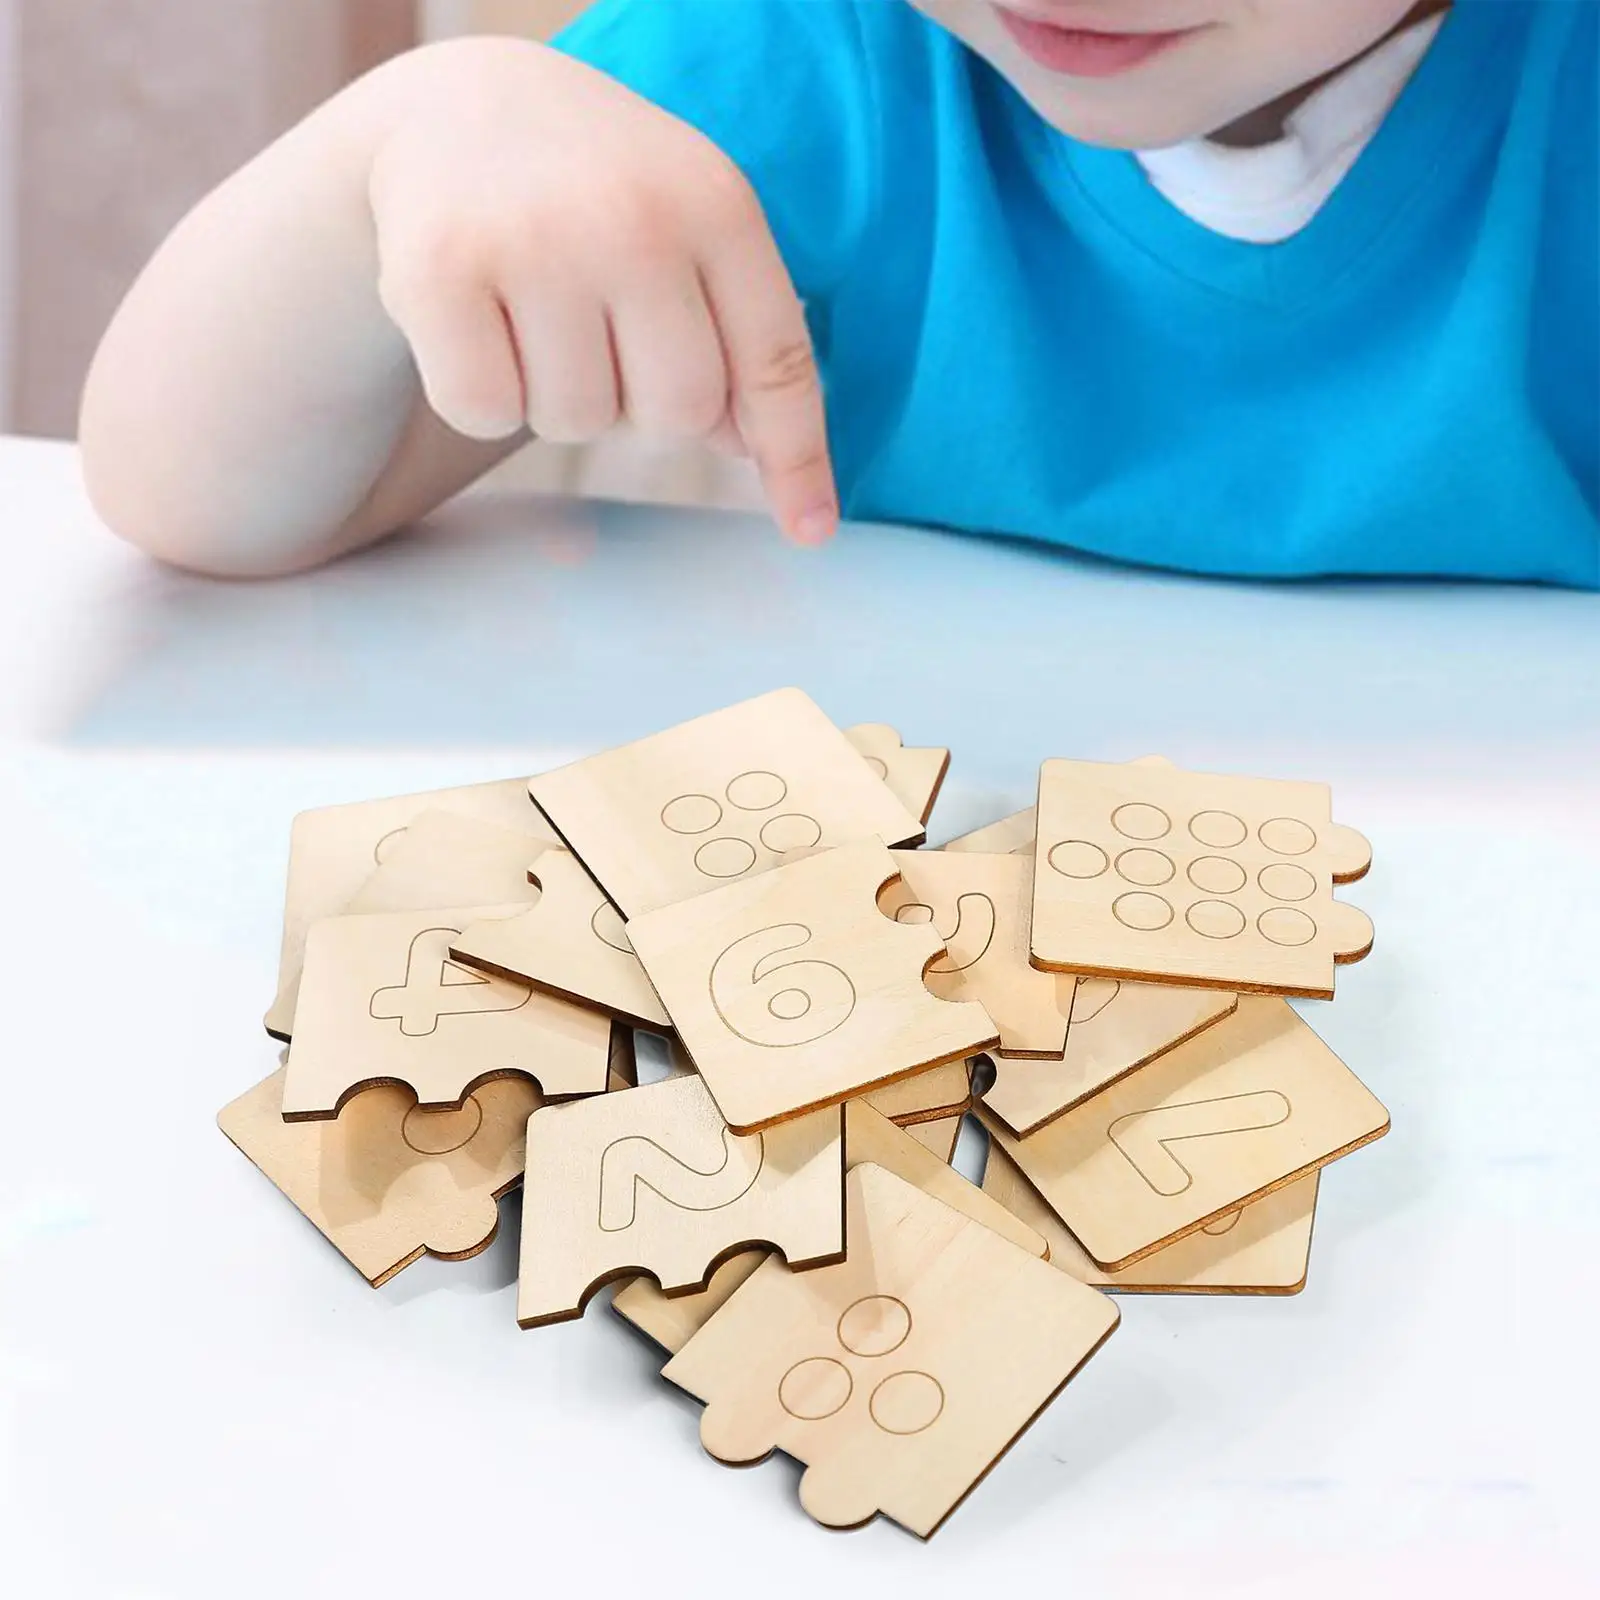 

Wooden Jigsaw Puzzle Pairing Games Building Toy Developmental Early Educational Toys for Children Toddlers Kids Birthday Gifts